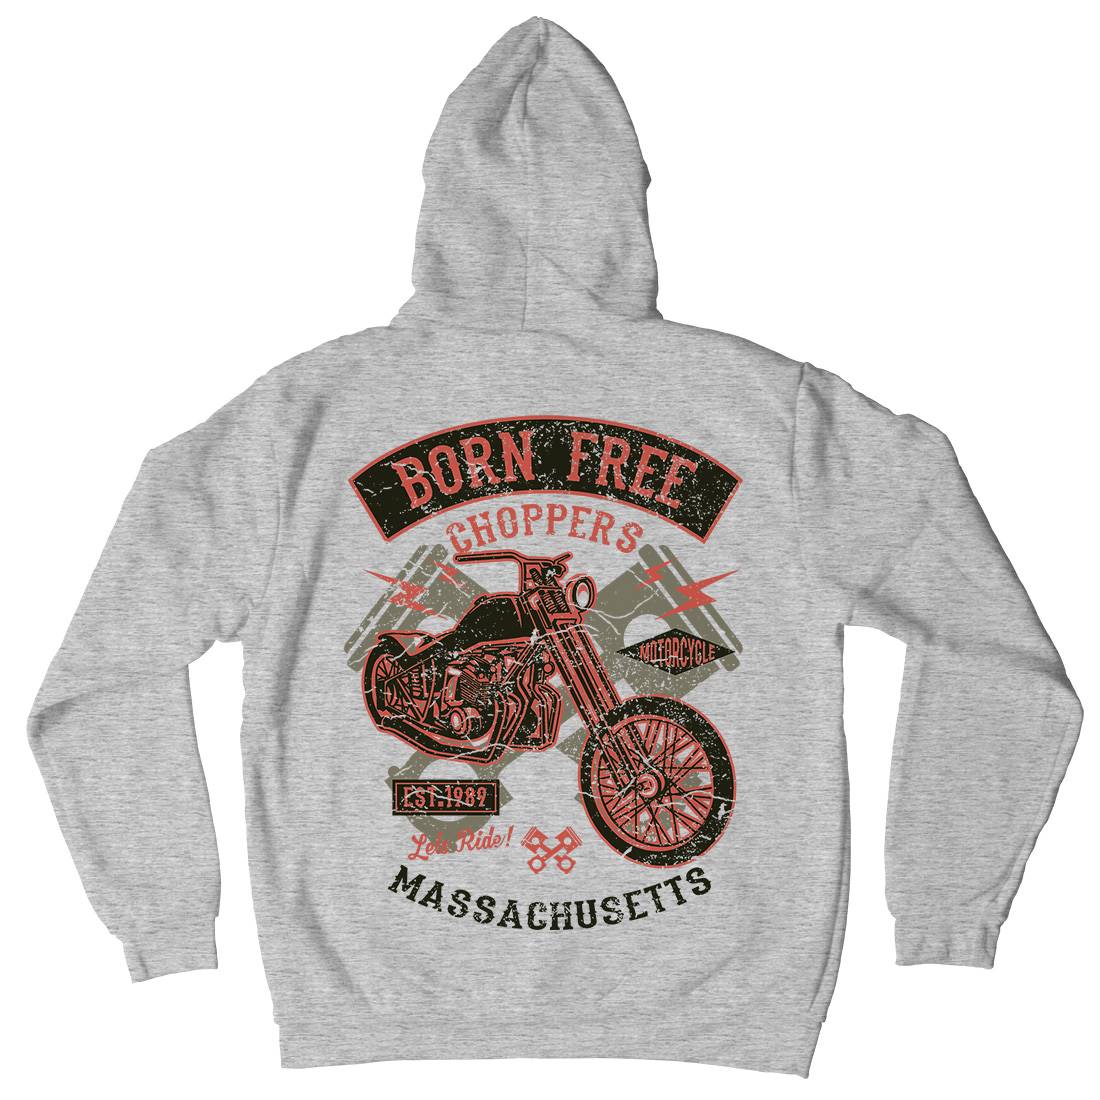 Born Free Choppers Mens Hoodie With Pocket Motorcycles A018